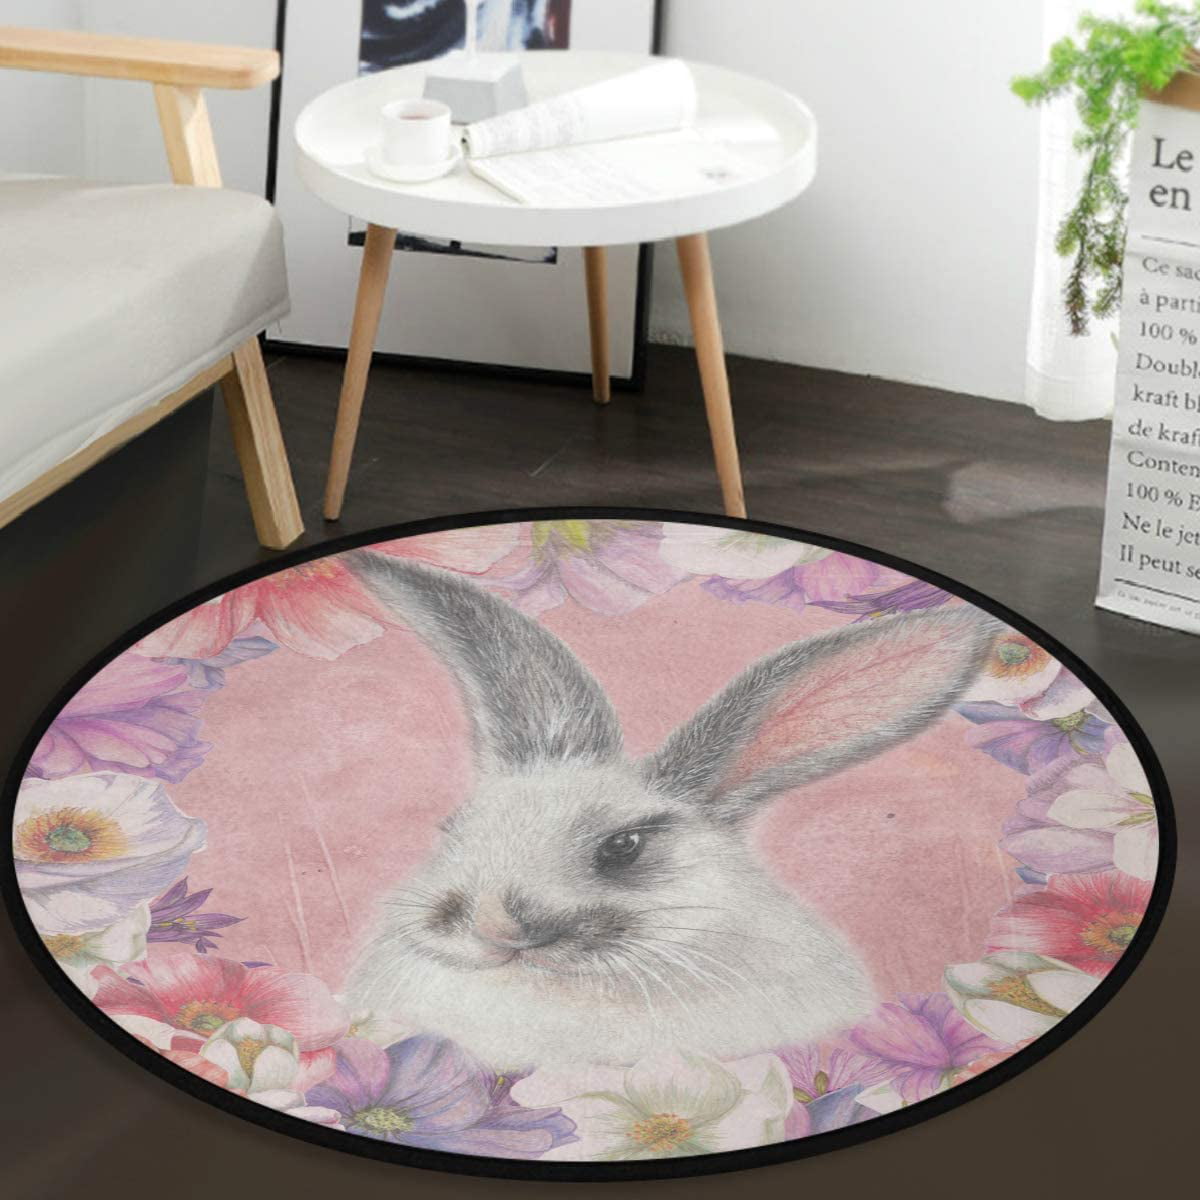 Set of 6 Place mats Forest Hare /& Small Flower Design Dining Table Mats Drinks